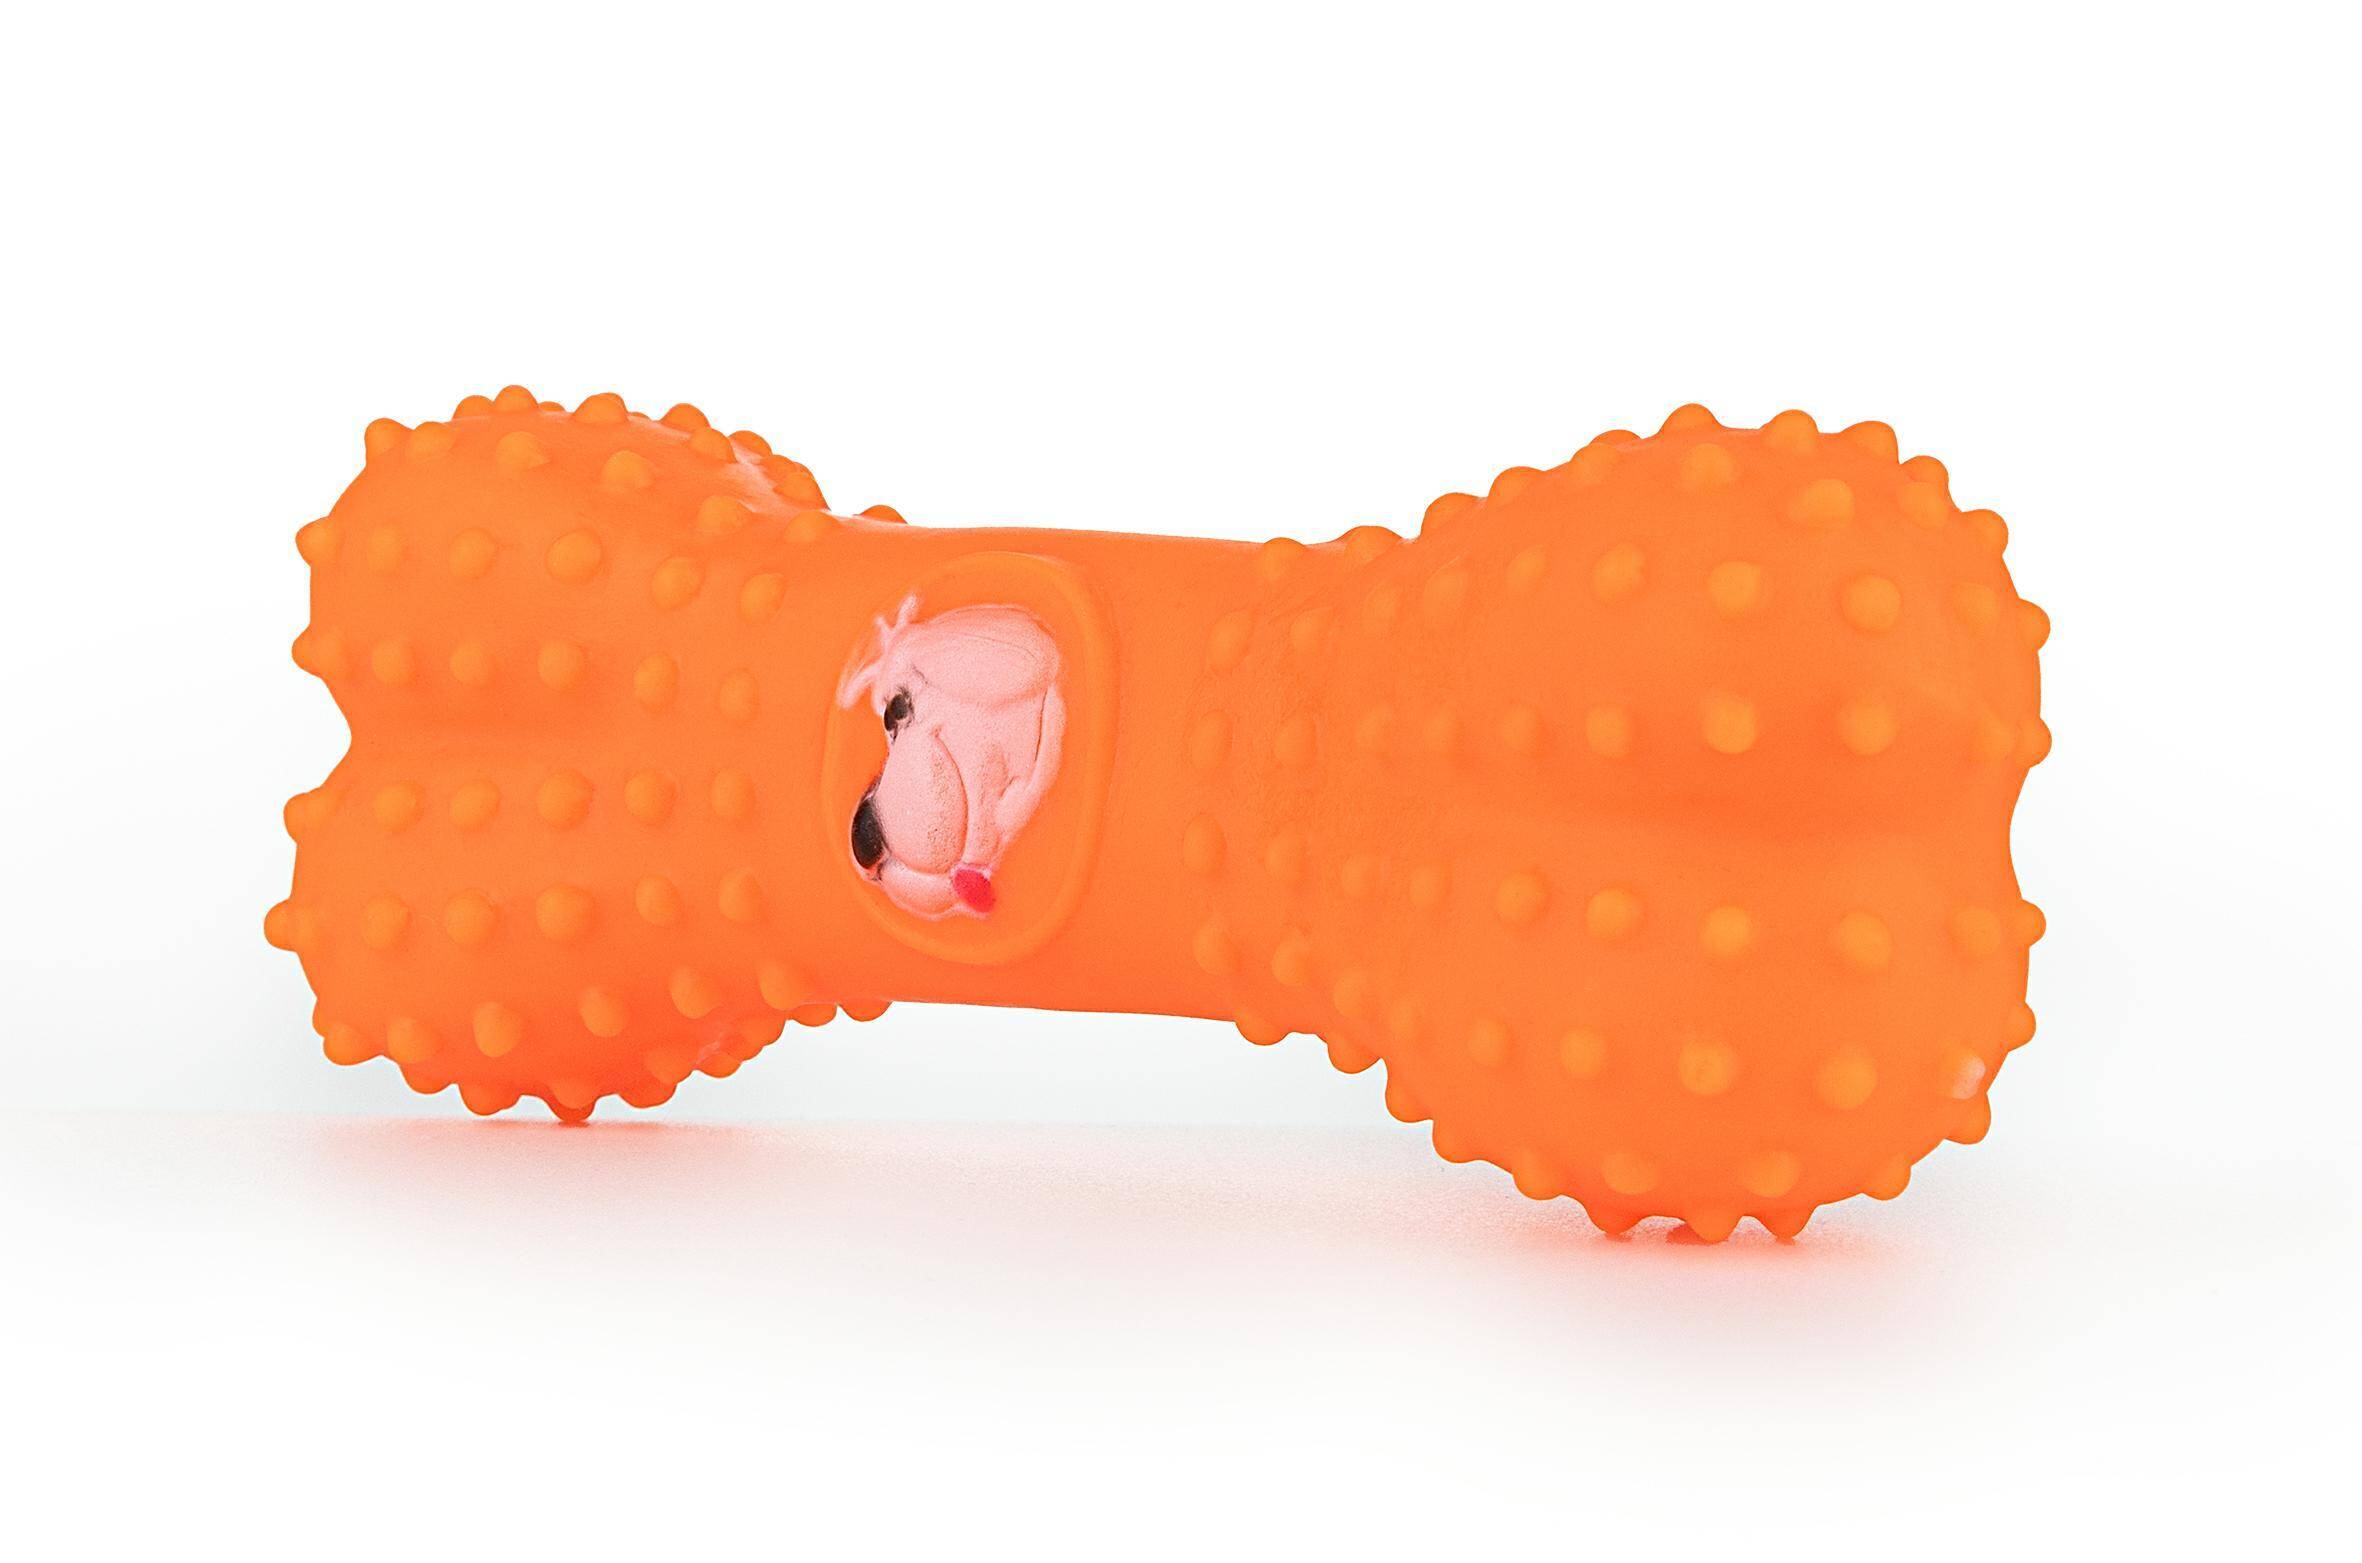 Squeaky Toy with Protrusions